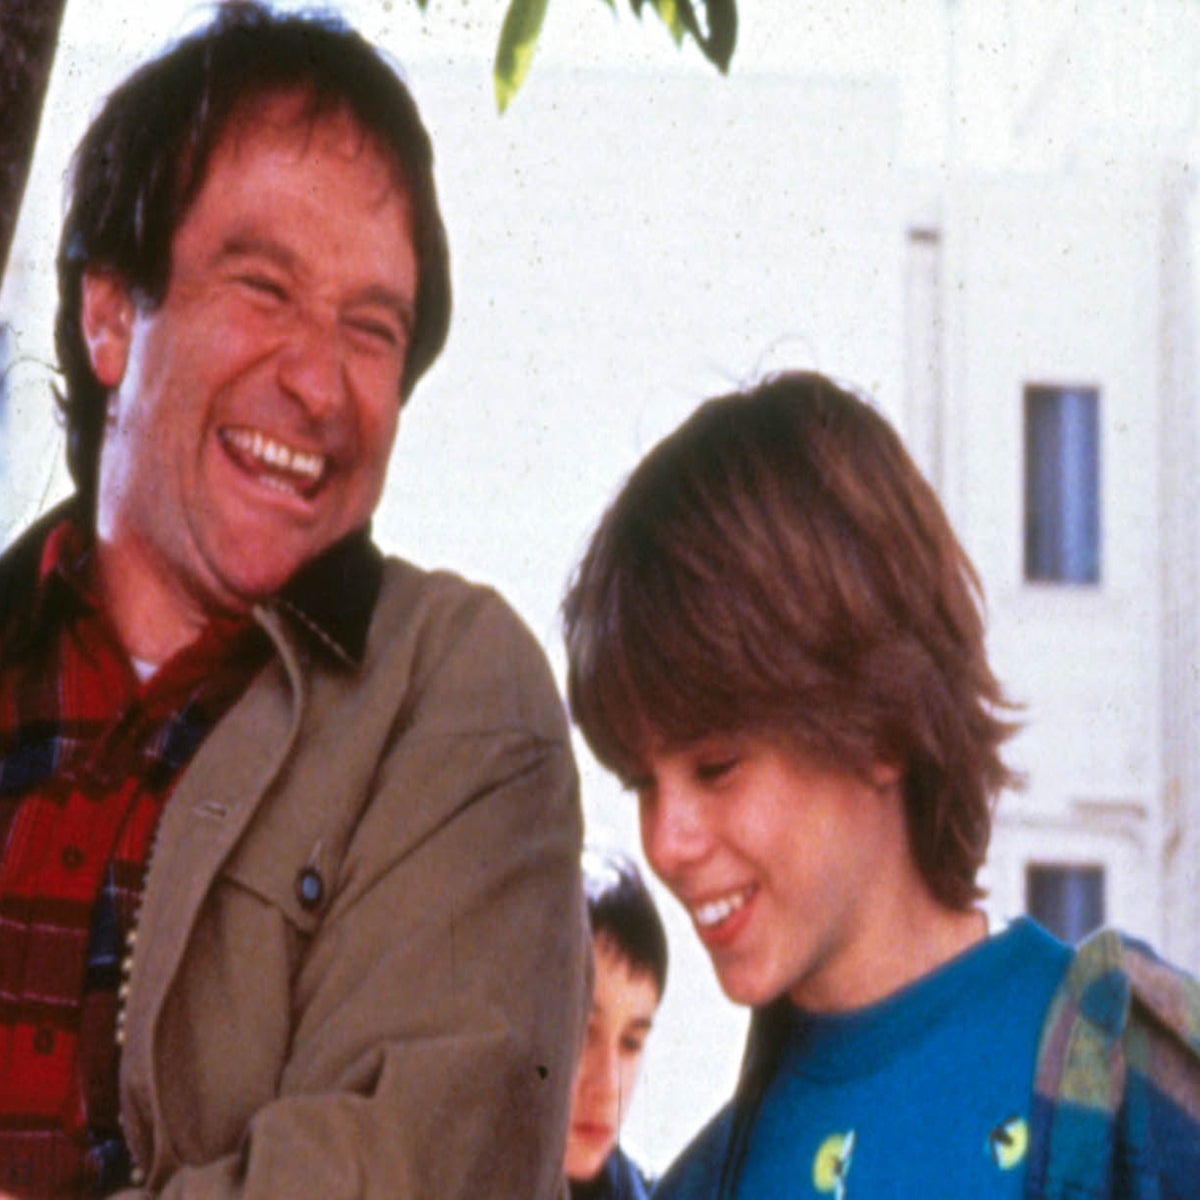 Mrs Doubtfire child star says he 'stayed away' from drugs because of Robin  Williams's advice